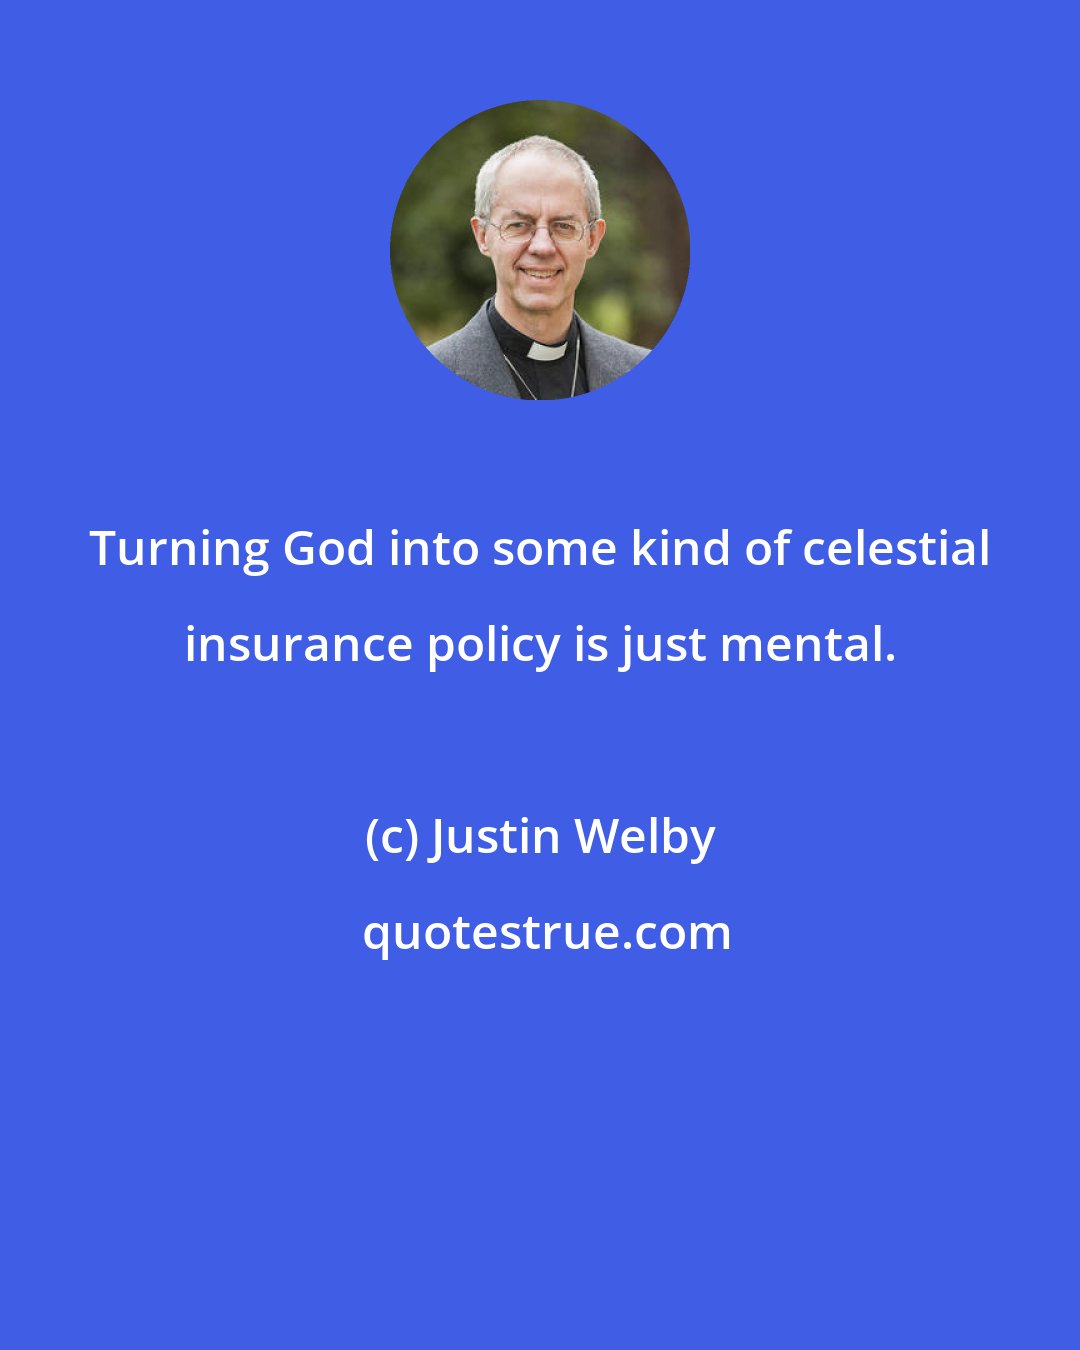 Justin Welby: Turning God into some kind of celestial insurance policy is just mental.